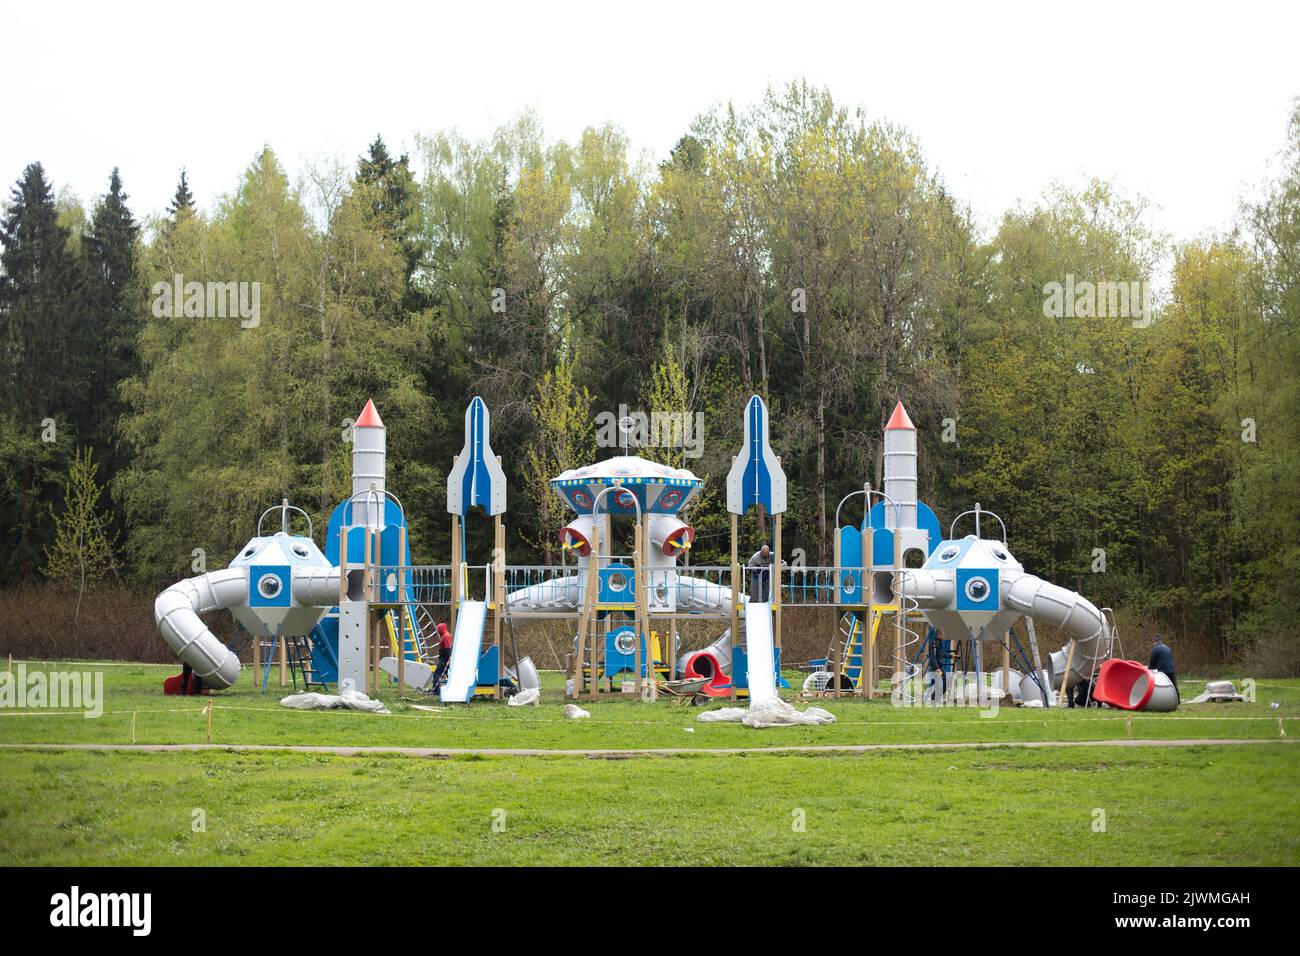 Large children's playground in park. Space station-style play area. Stock Photo